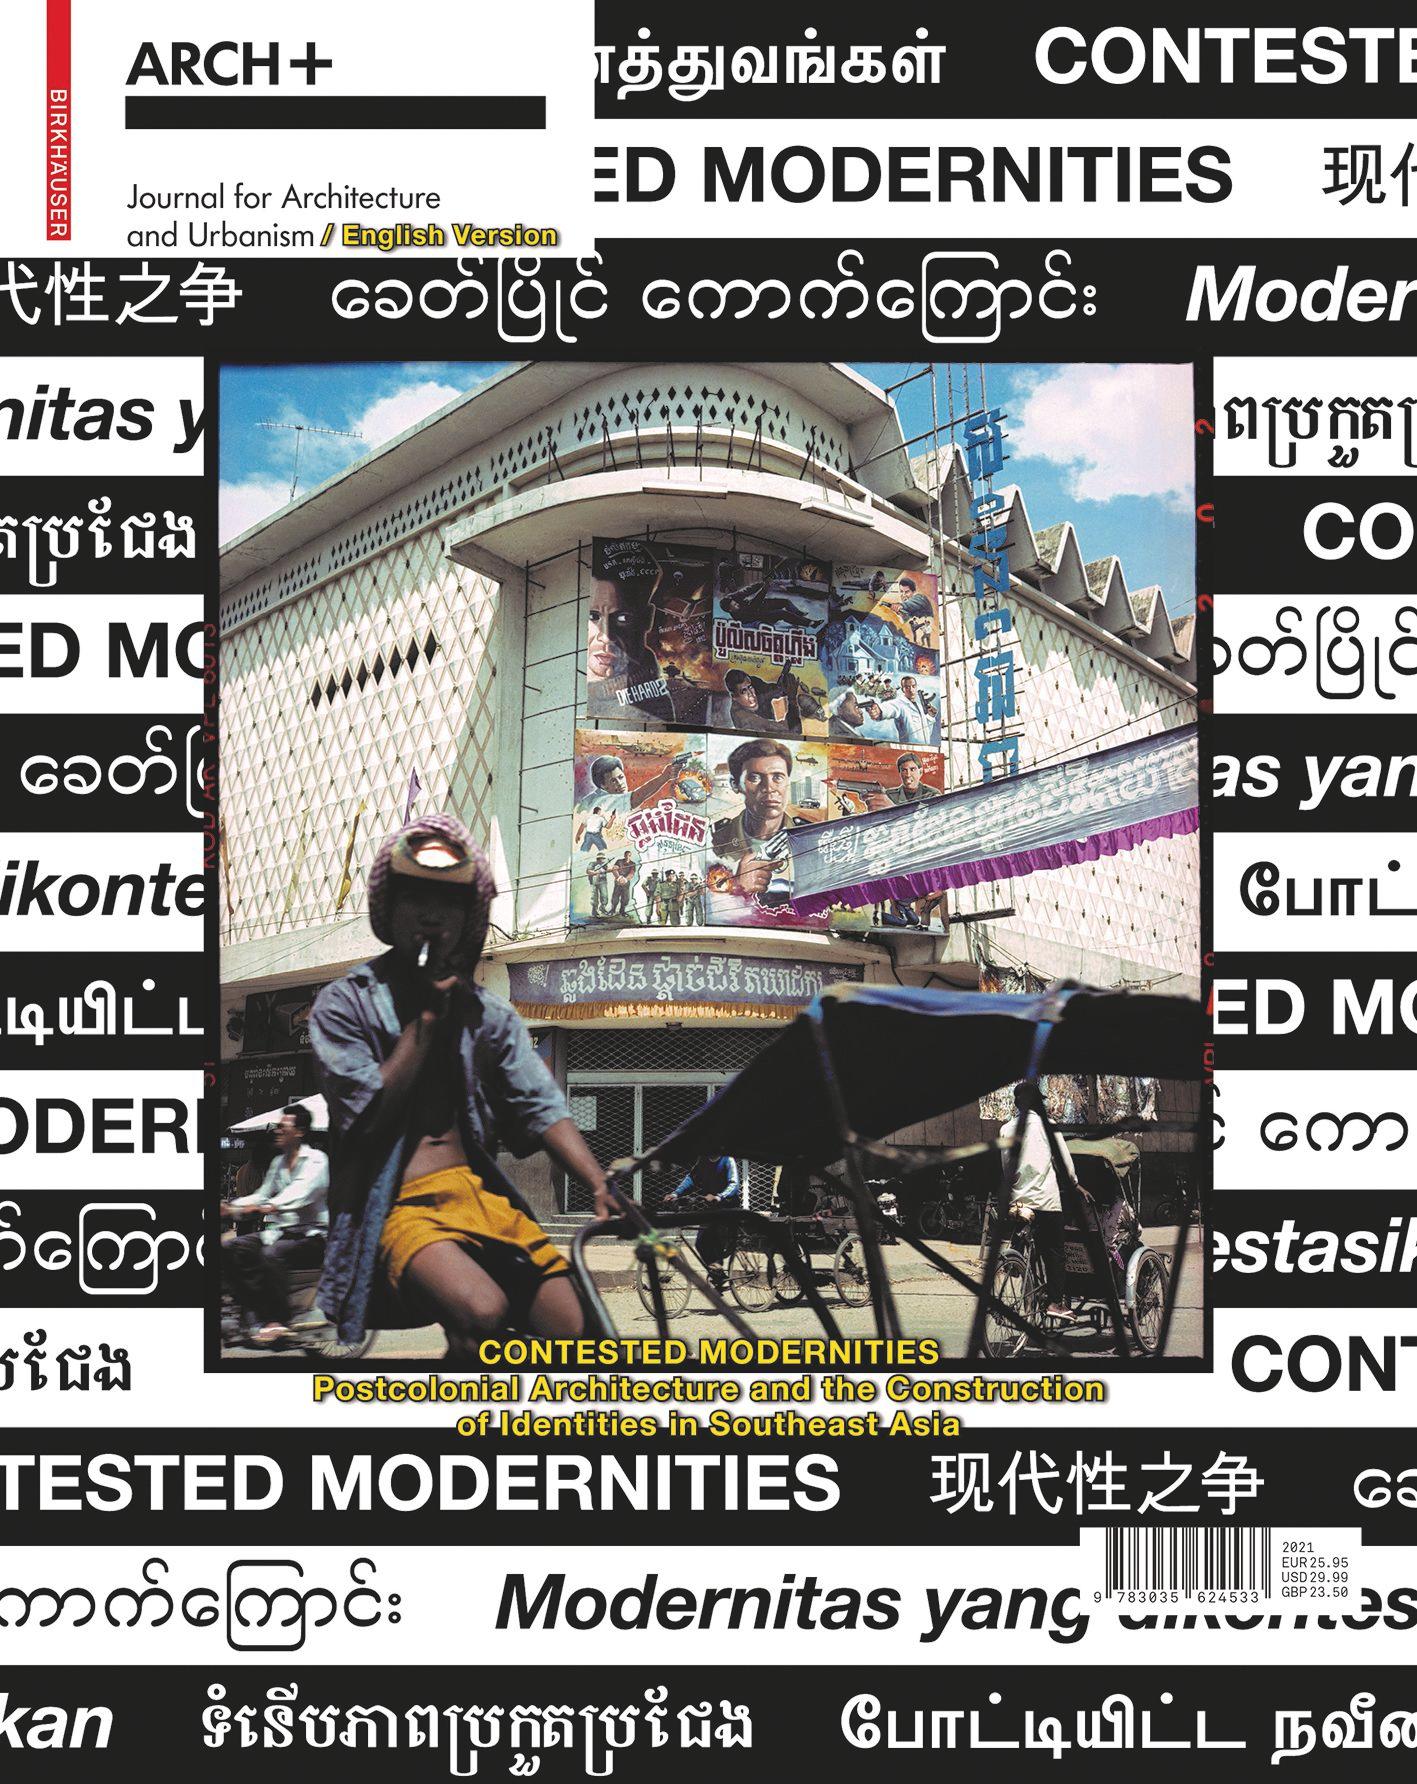 Contested Modernities's cover